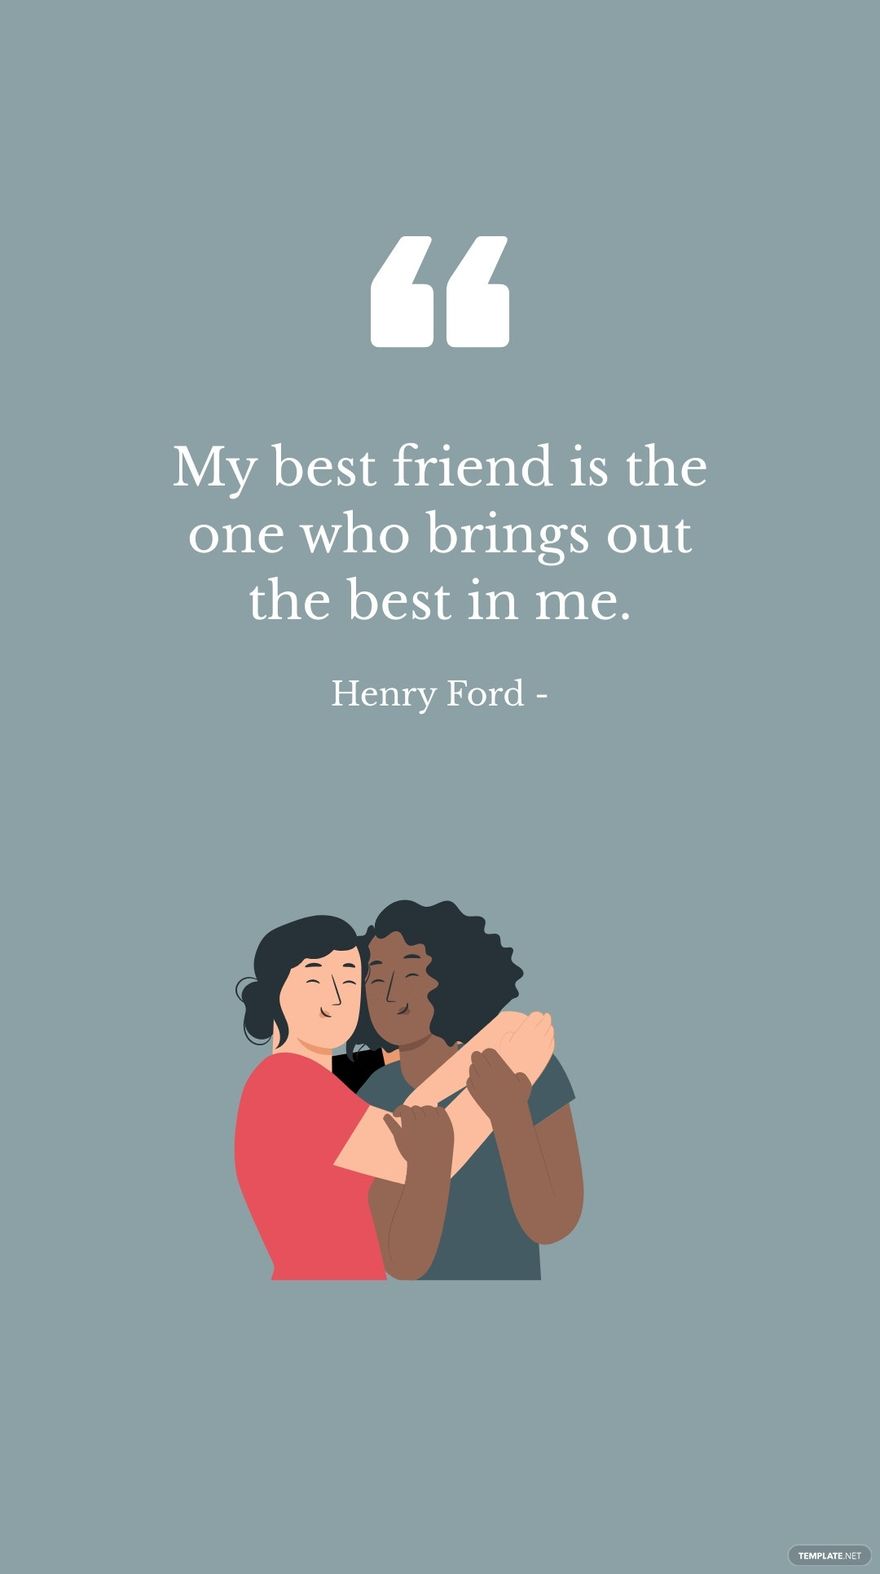 Henry Ford - My best friend is the one who brings out the best in me.